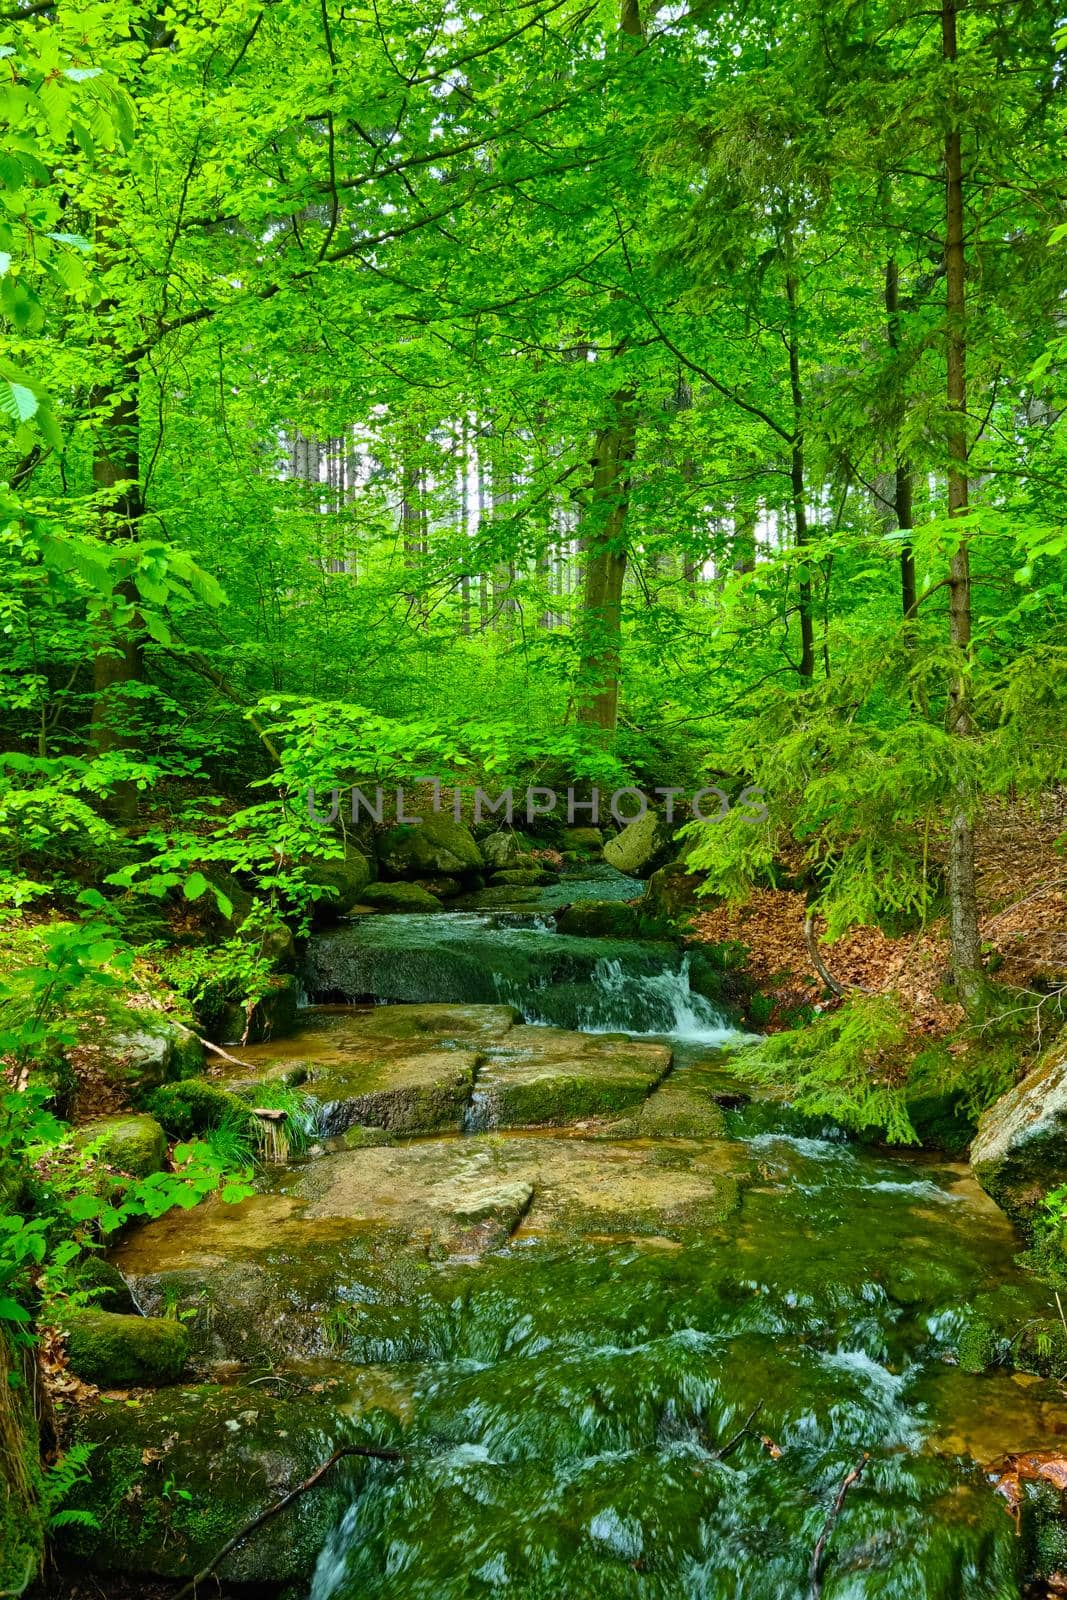 A picturesque view of the stream that flows through the stones in the green forest. by kip02kas